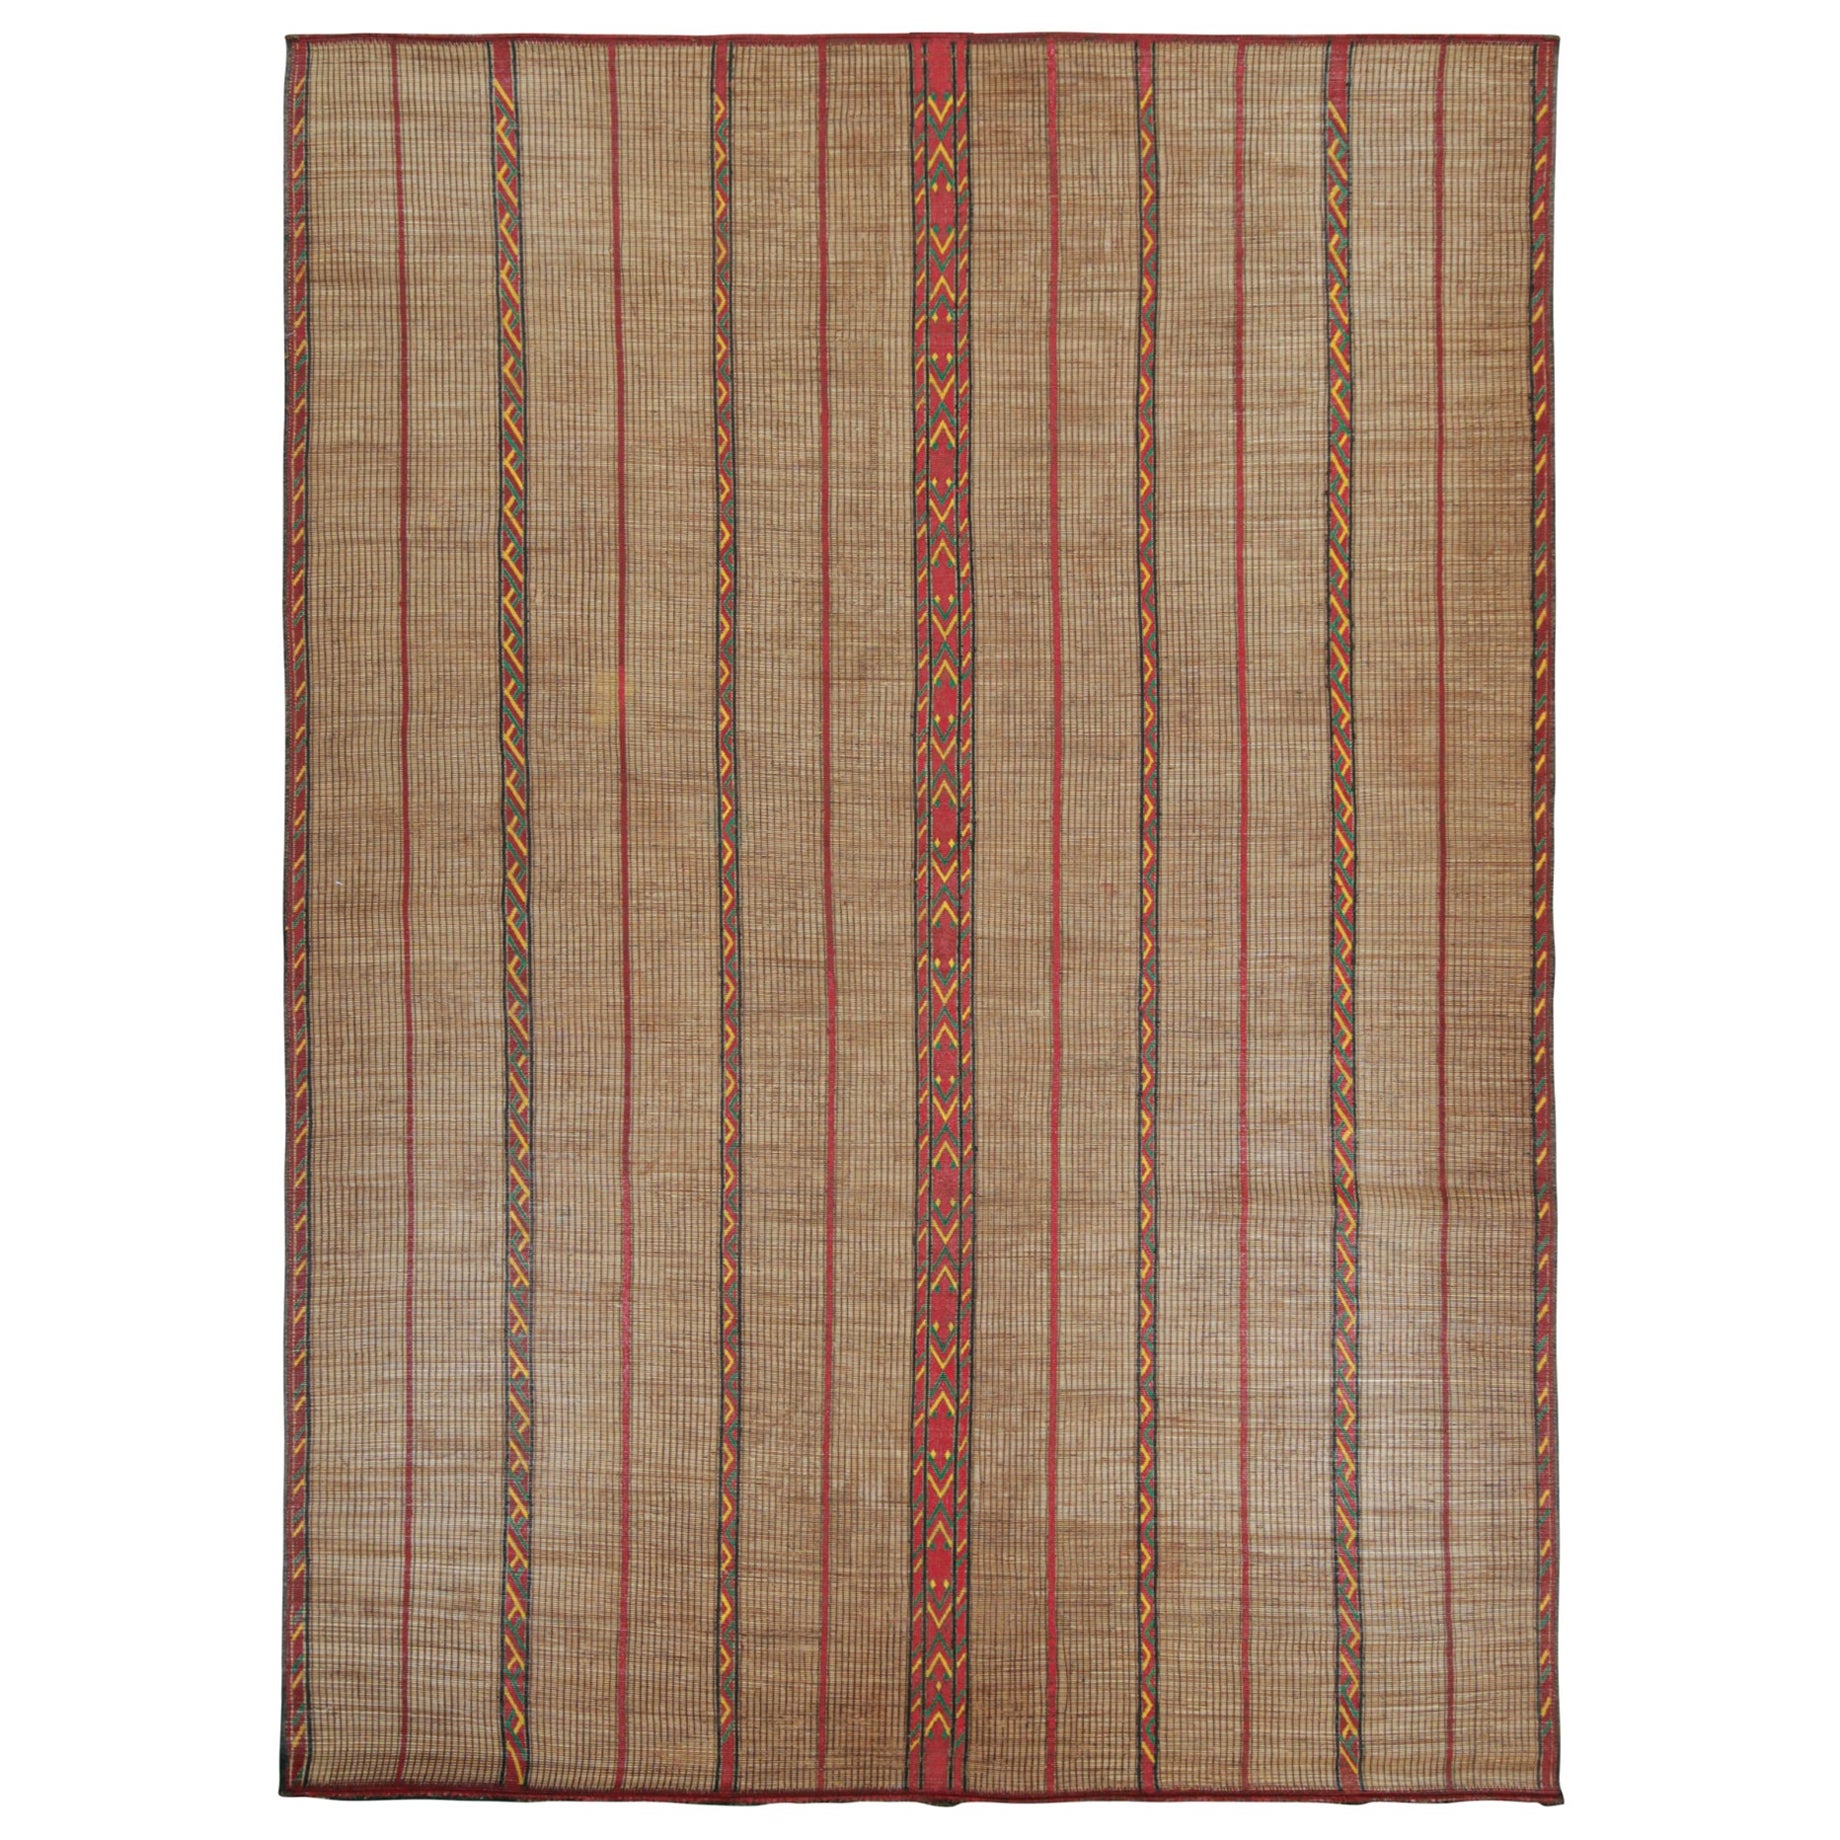 Vintage Moroccan Tuareg Mat in Beige and Red Stripes, from Rug & Kilim